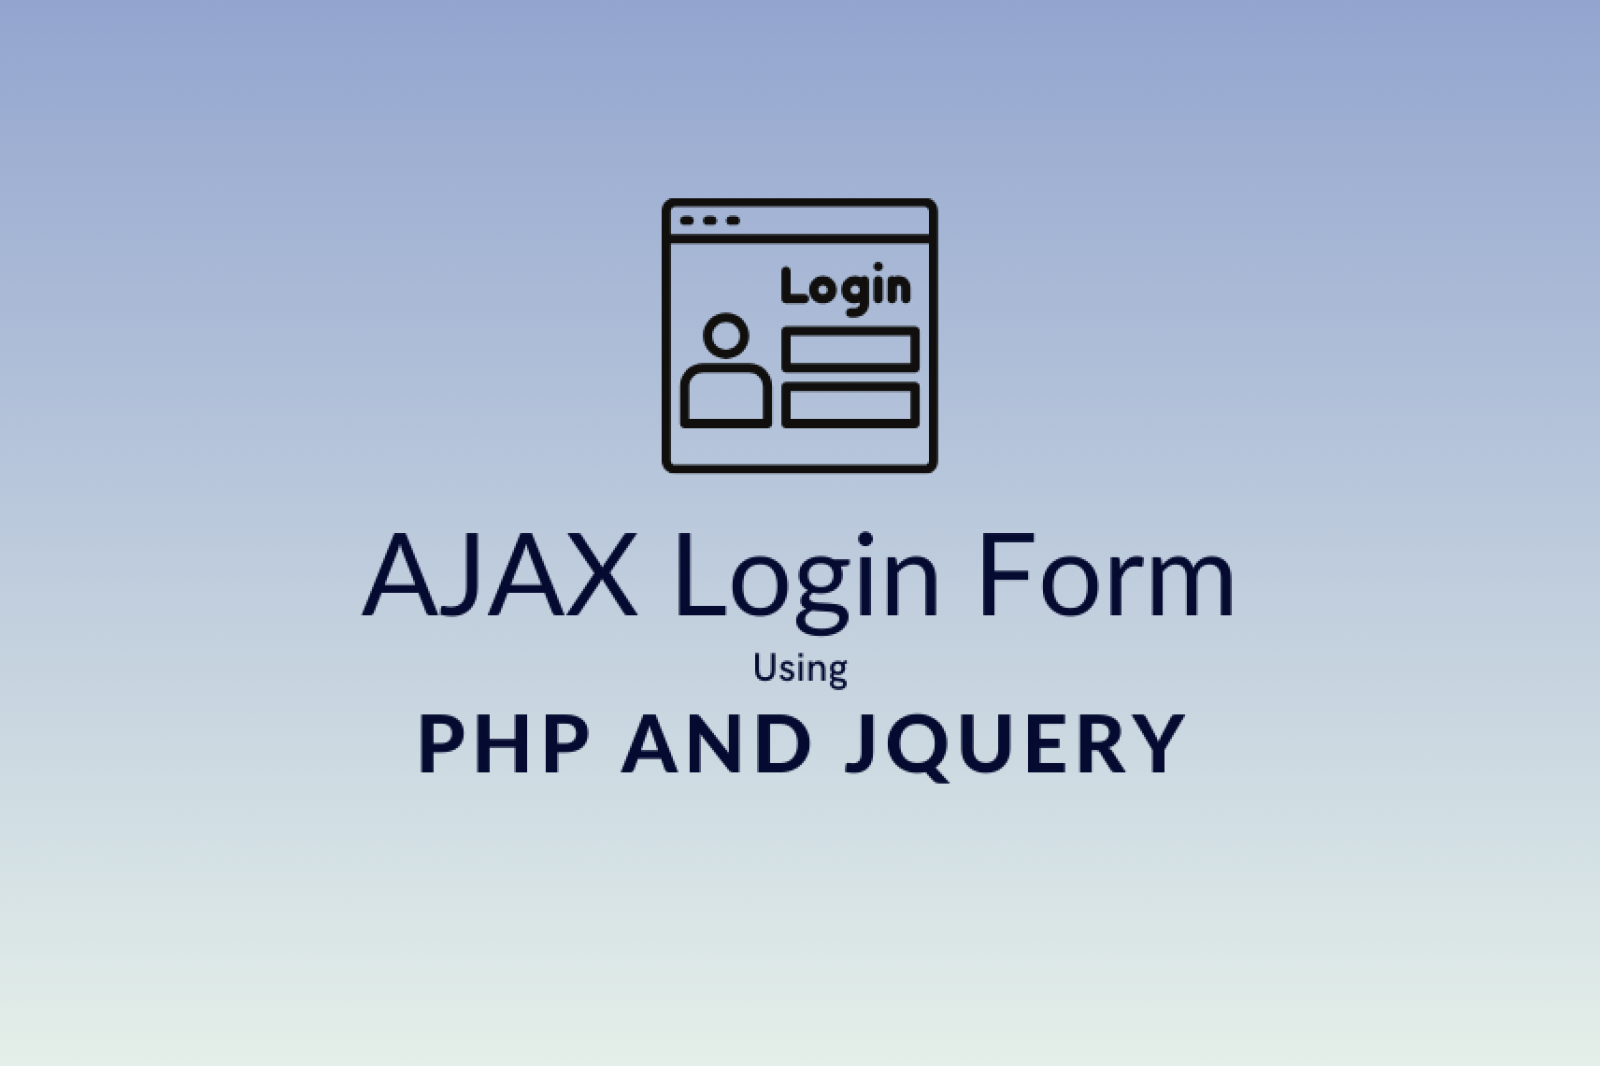 Simplified AJAX Login Form Using PHP and jQuery